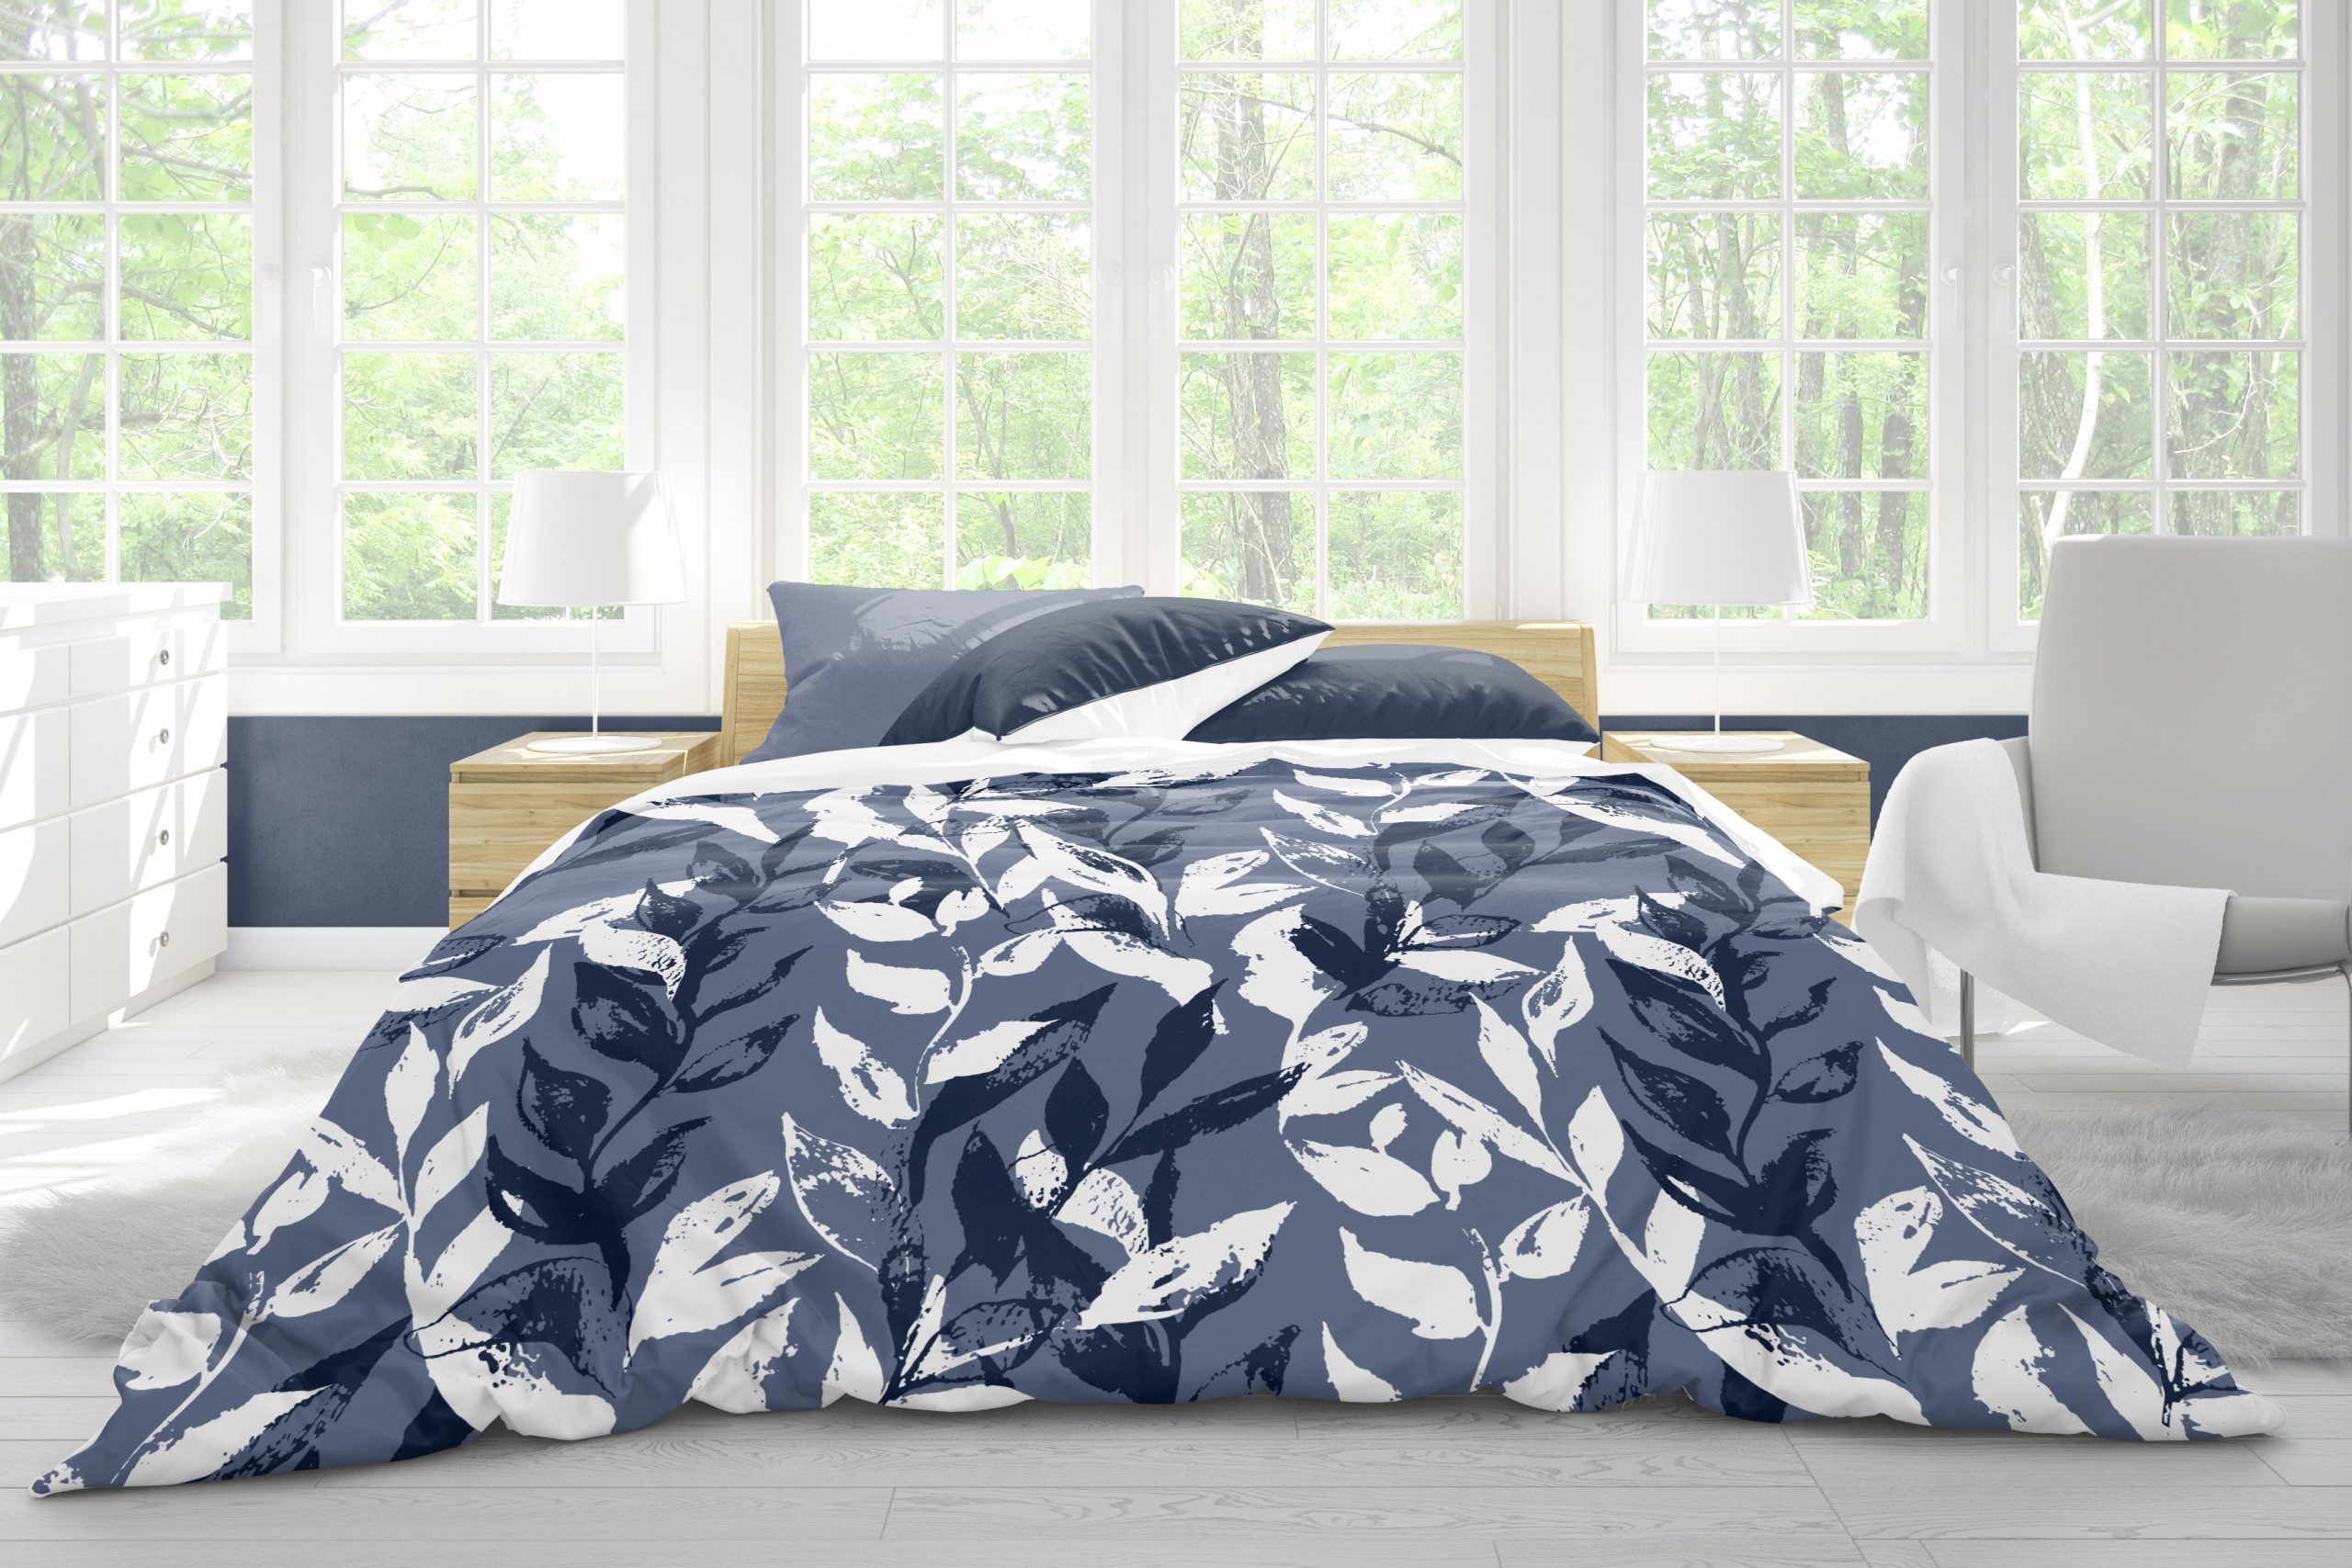 Choosing the Perfect Duvet Cover: A Guide to Colors, Patterns, and Materials